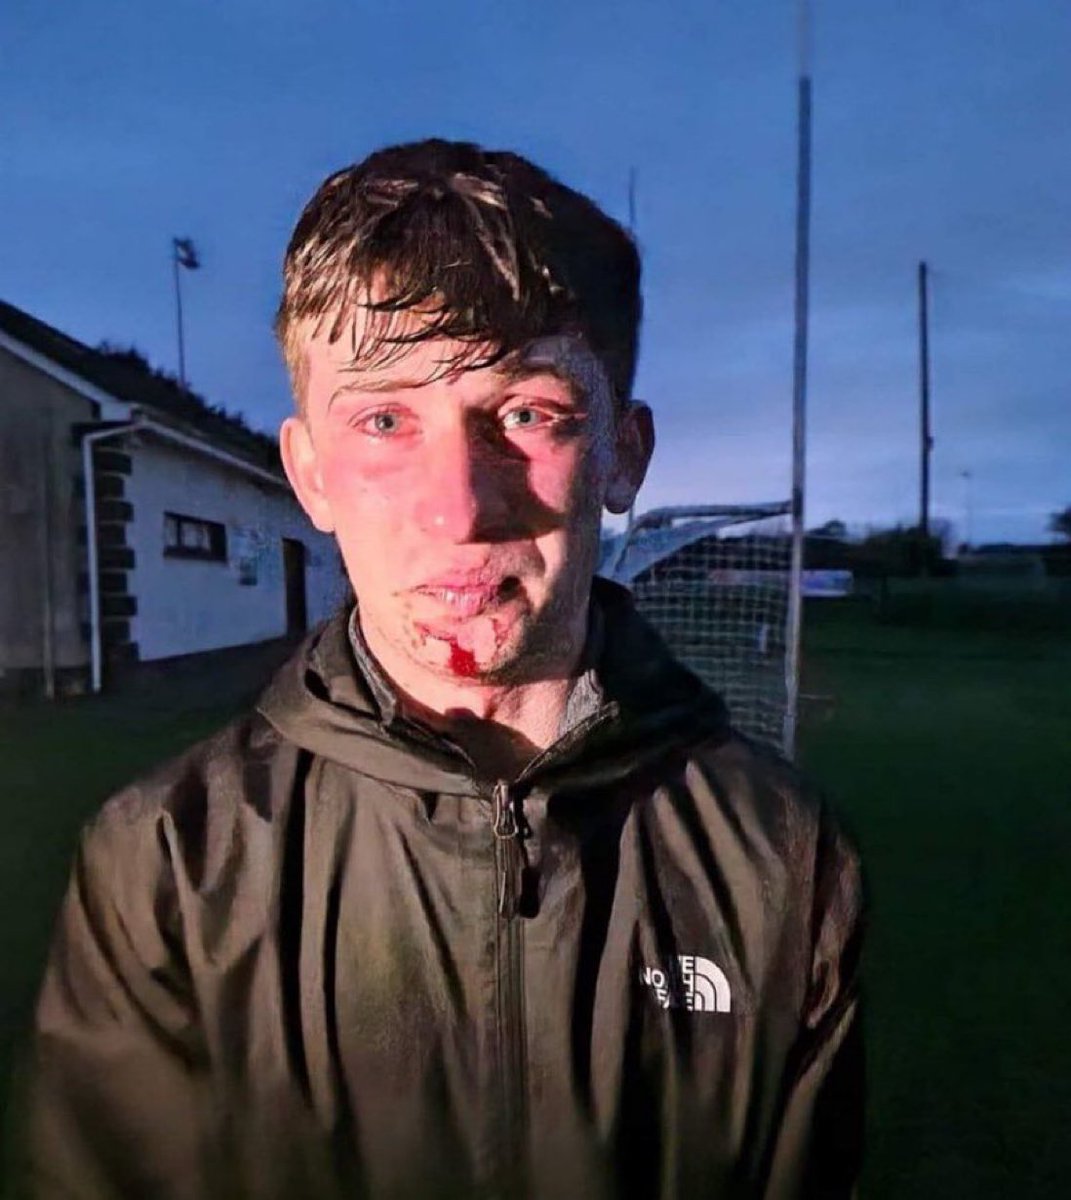 This Irish teenager was pepper sprayed multiple times giving him visible swollen eyes; he was beaten and hit on the face several times with police baton. Reports say his teeth were cracked and other facial injuries. His crimes were attending a peaceful demonstration against…